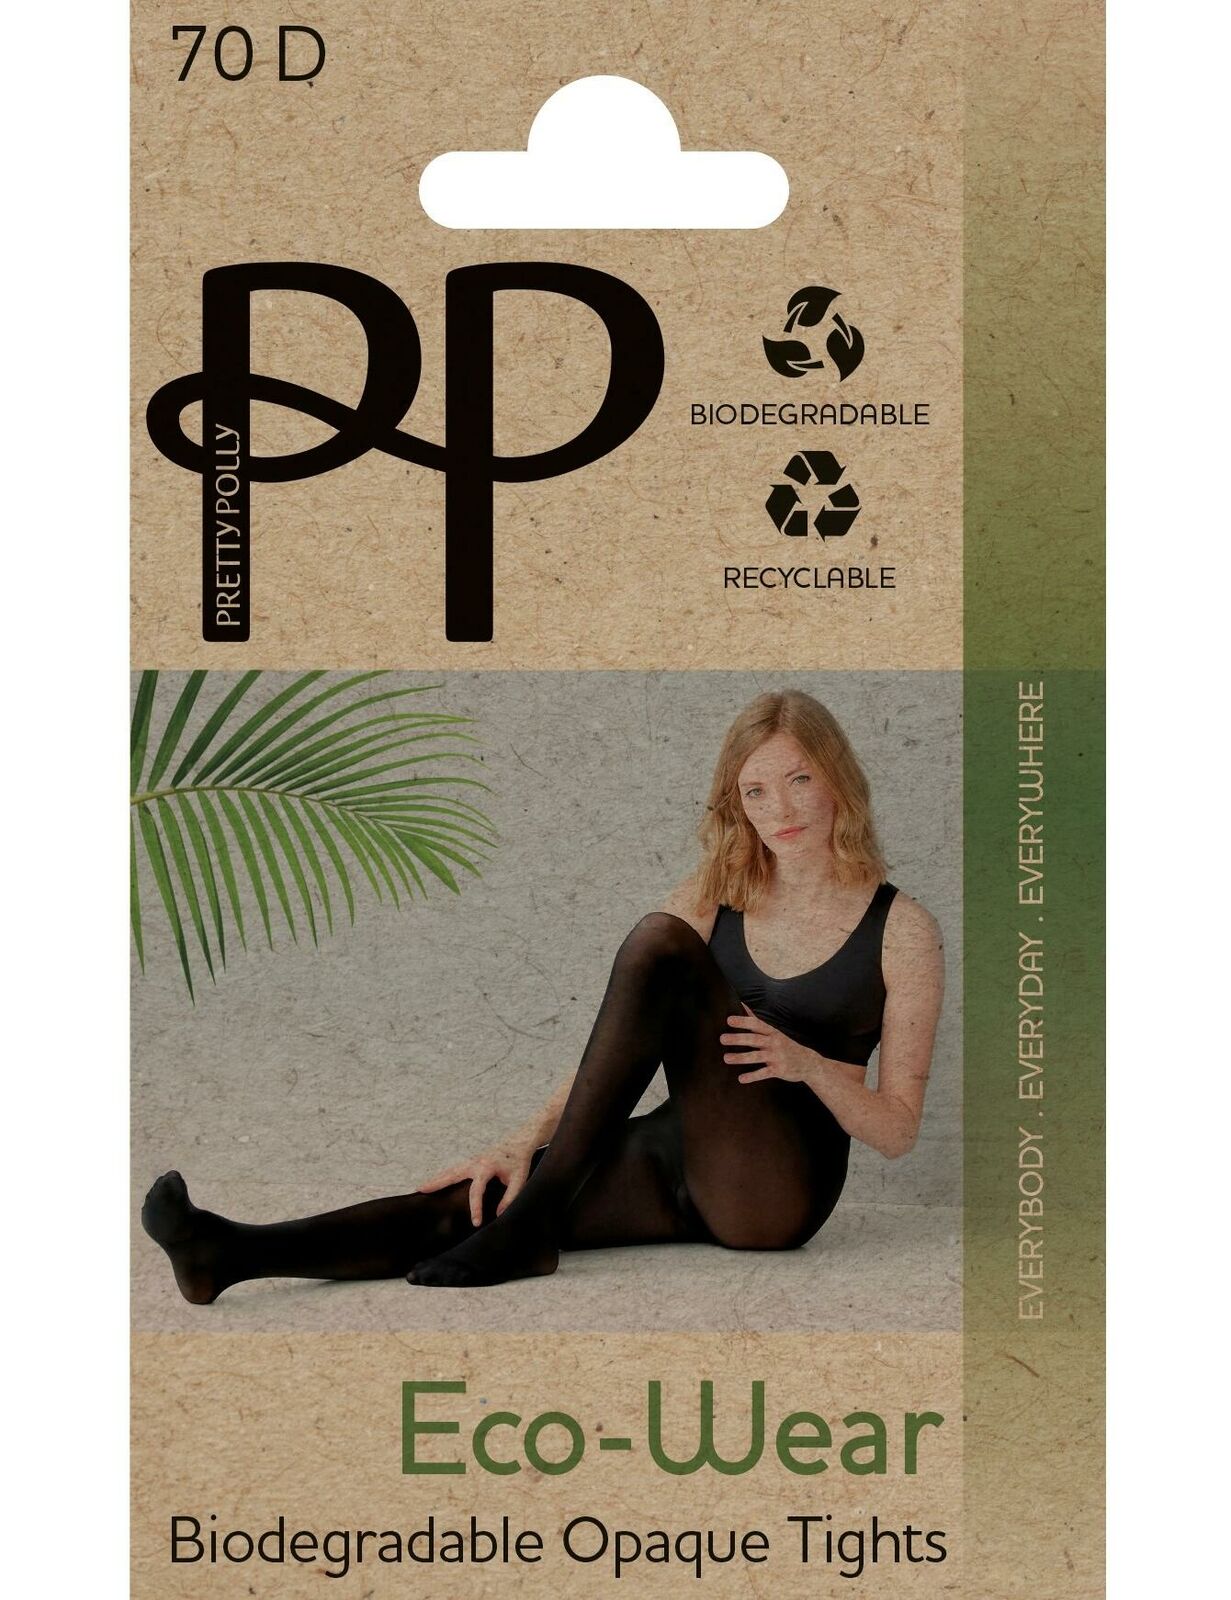 Pretty Polly 60 Denier New 3D Opaque Tights In Stock At UK Tights